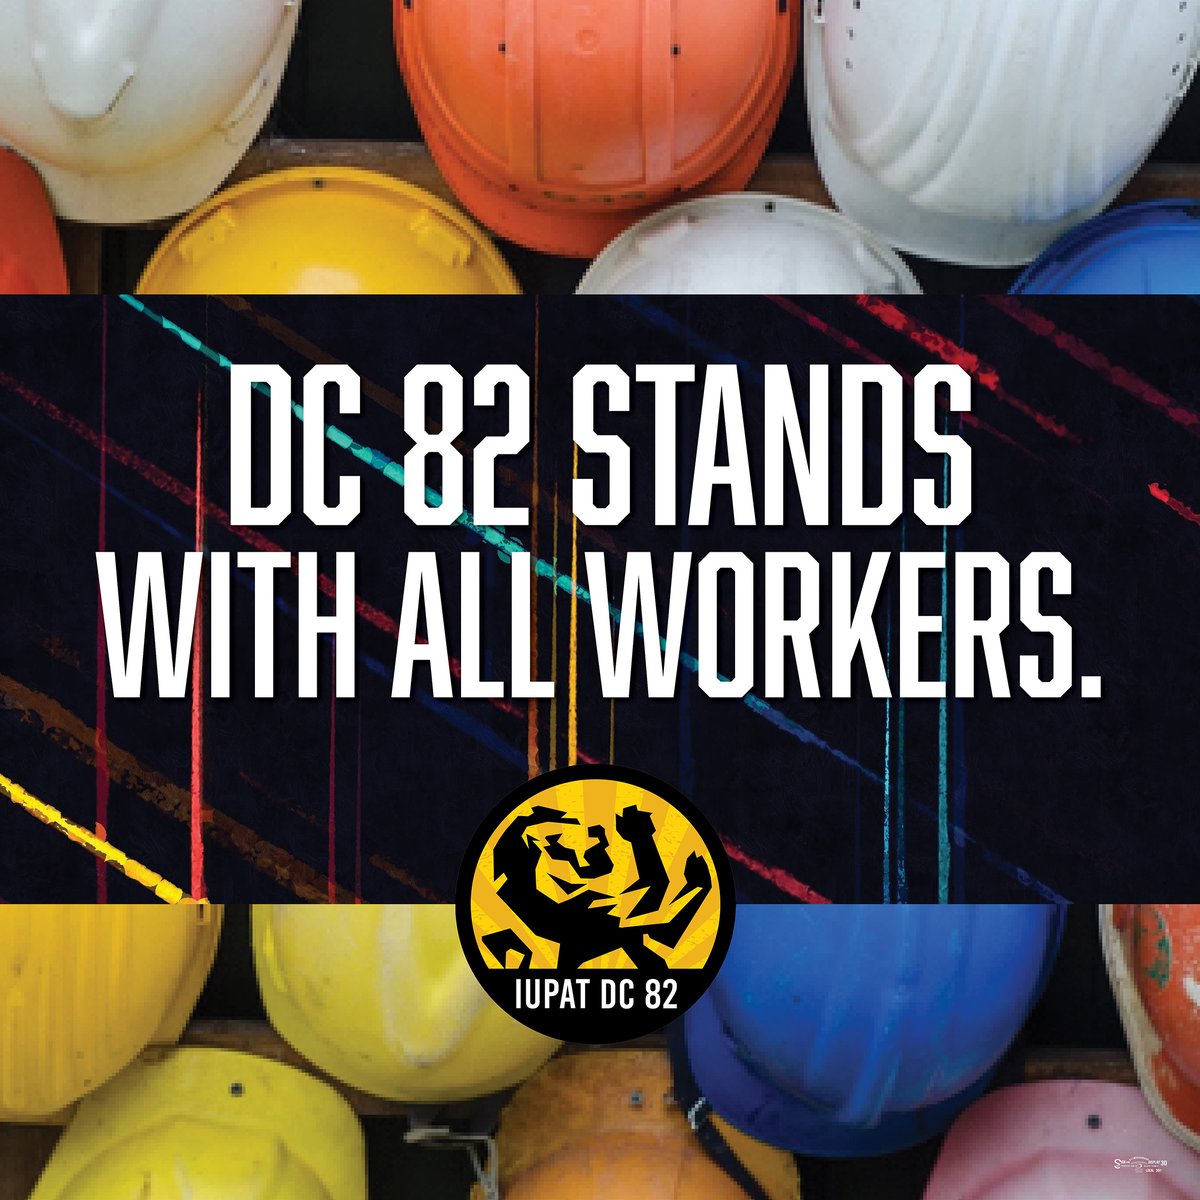 DC 82 stands alongside the many workers who have participated in #Striketober, and are now participating in #Strikevember. Let's keep #RealizingOurPower.